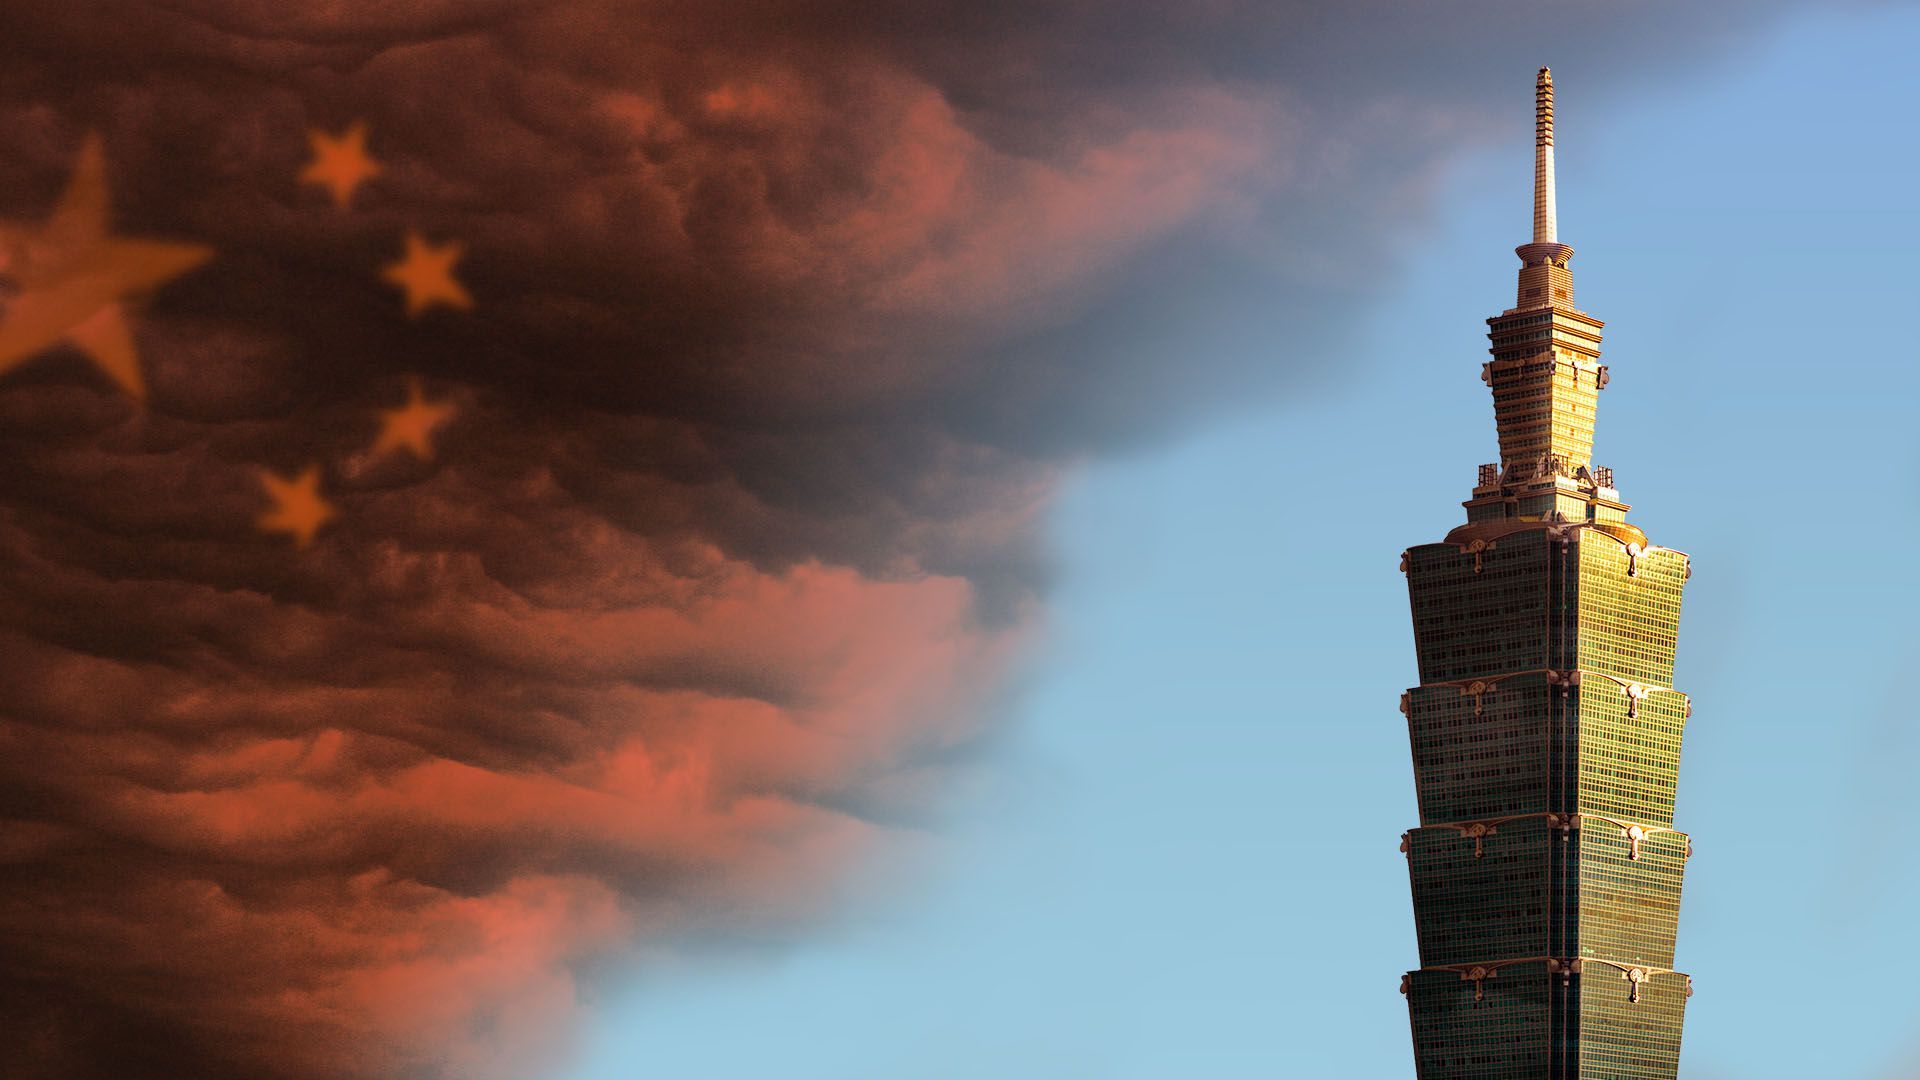 Illustration of the Taipei 101 building with a dark red cloud resembling the Chinese flag approaching